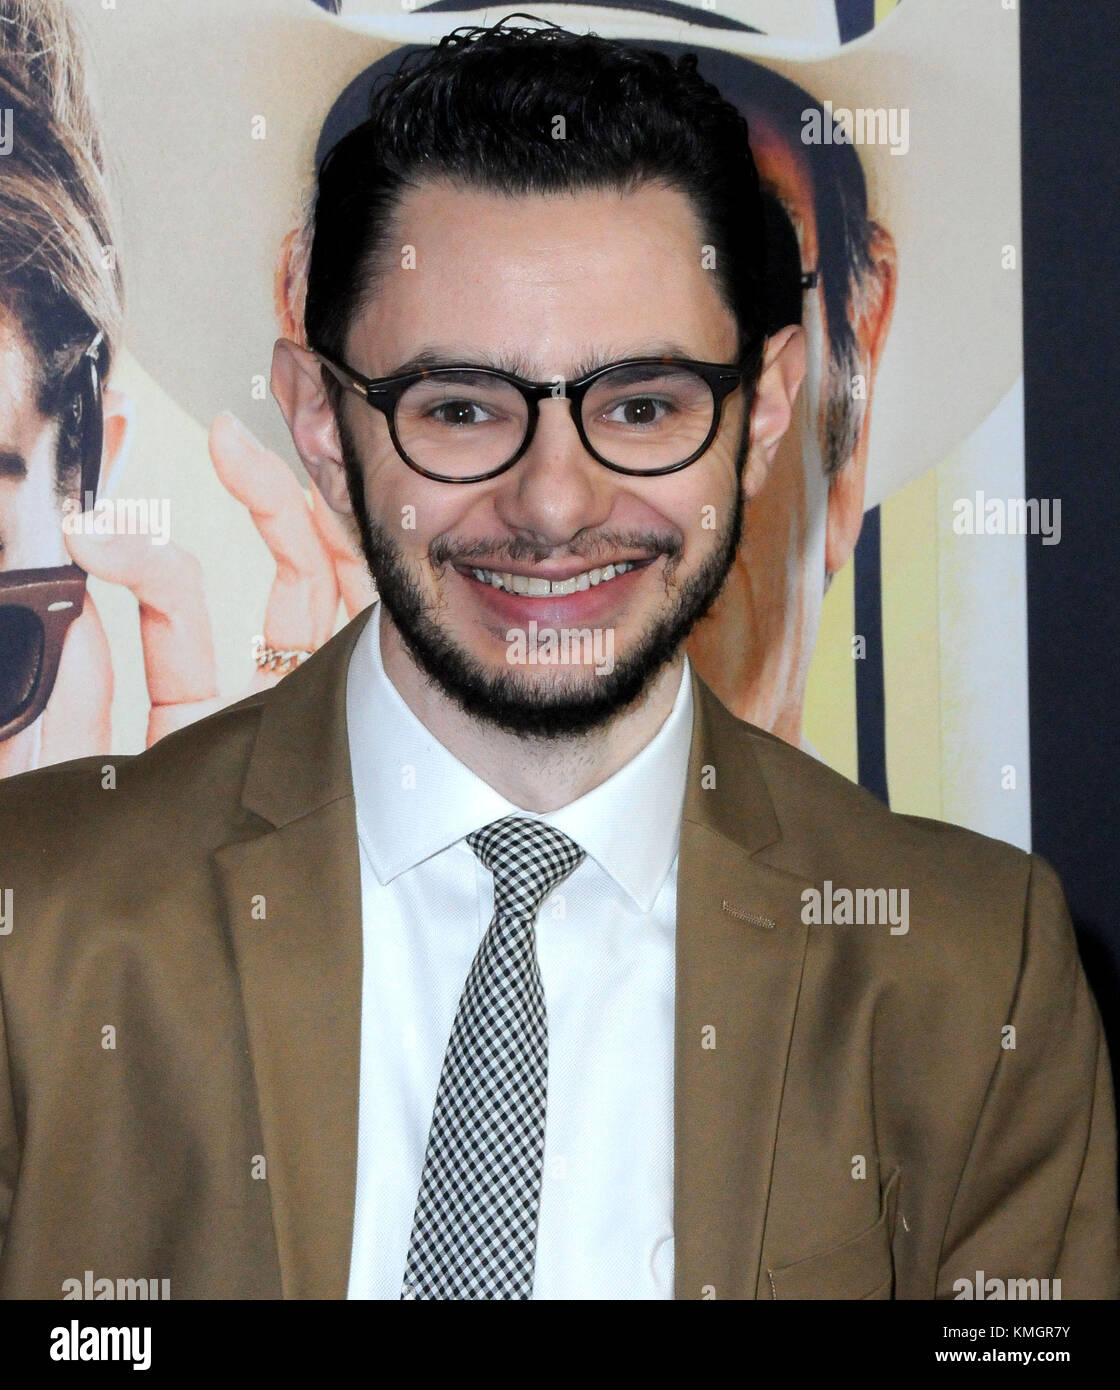 Los Angeles, USA. 07th Dec, 2017. Actor Nick Peine attends the Los Angeles  Premiere of 'Just Getting Started' at Arclight Hollywood on December 7,  2017 in Los Angeles, California. Photo by Barry